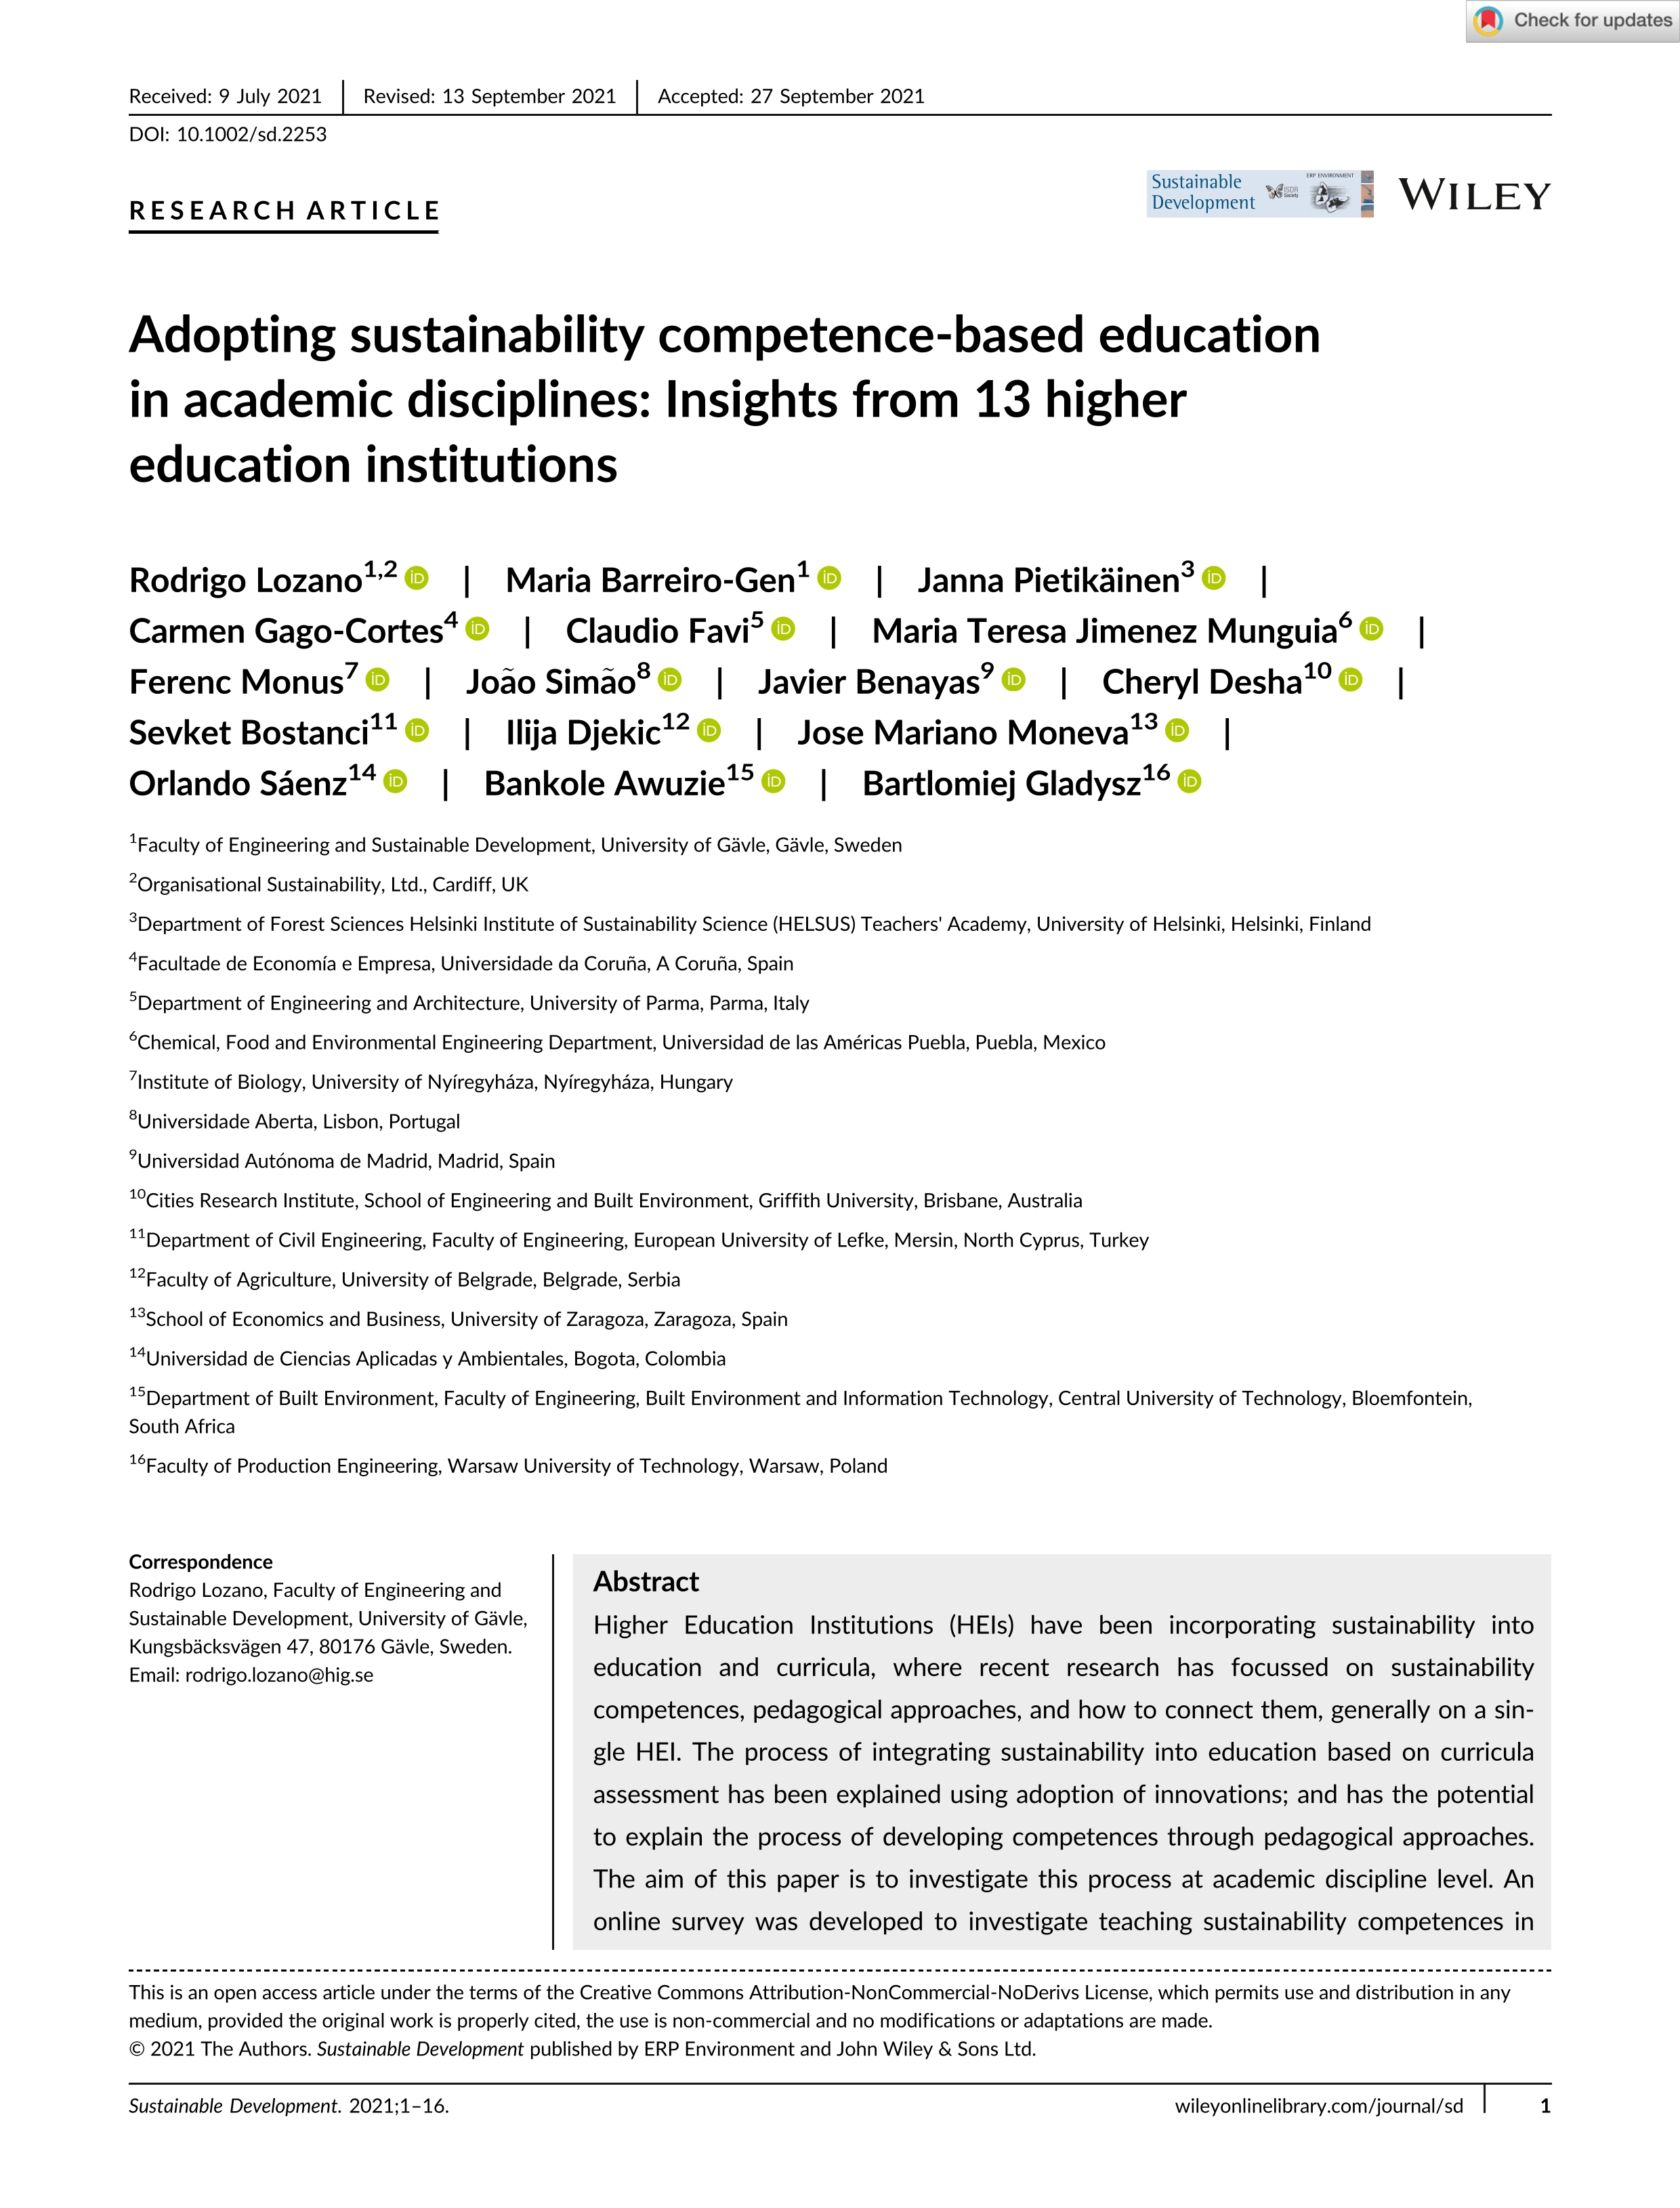 Adopting sustainability competence-based education in academic disciplines: Insights from 13 higher education institutions